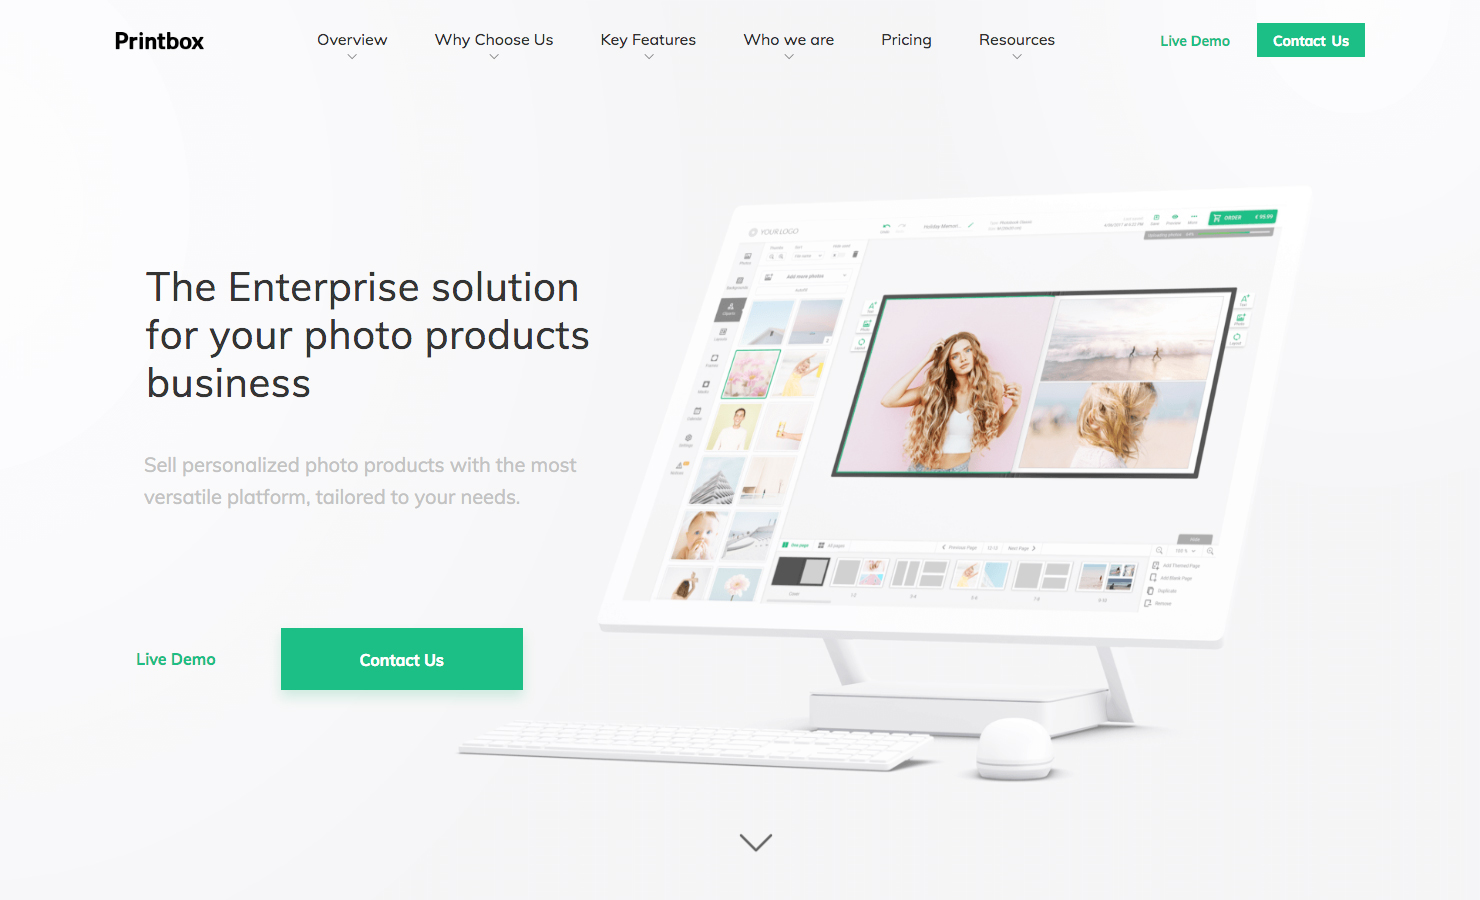 Printbox - The Enterprise solution for photo products business